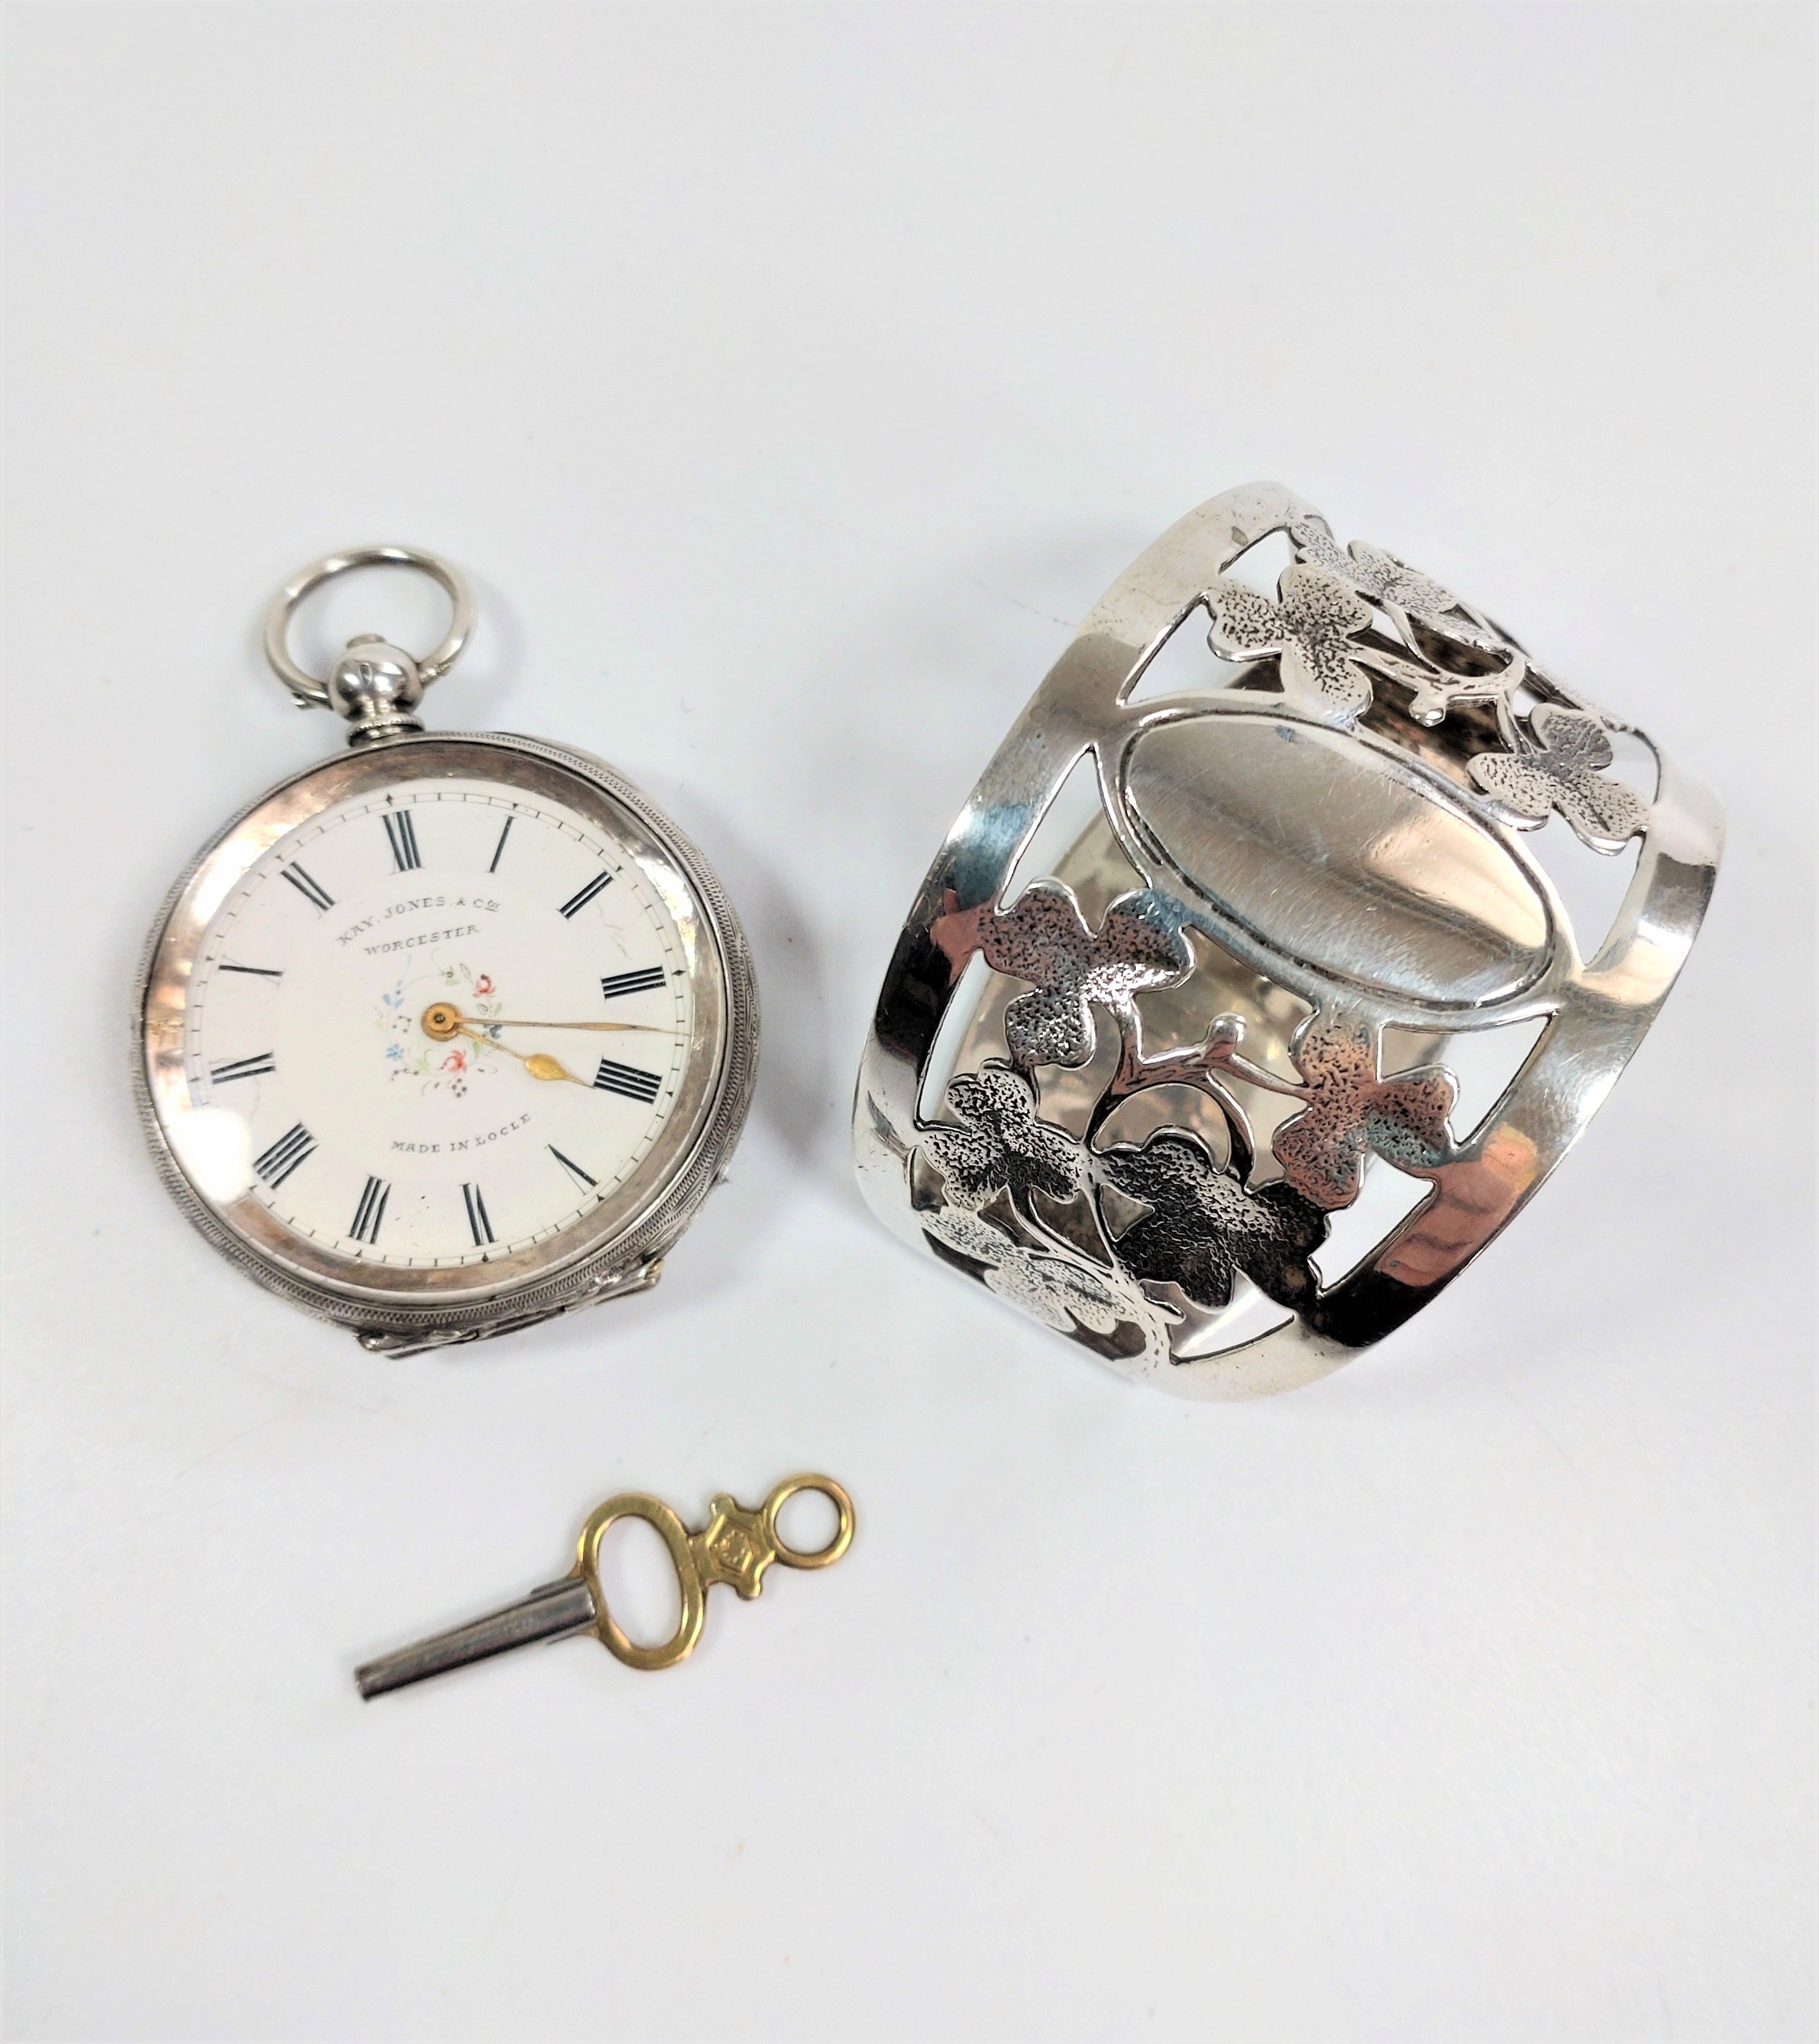 A swiss Fob watch, late 19th century, with a key and a sterling silver napkin ring.